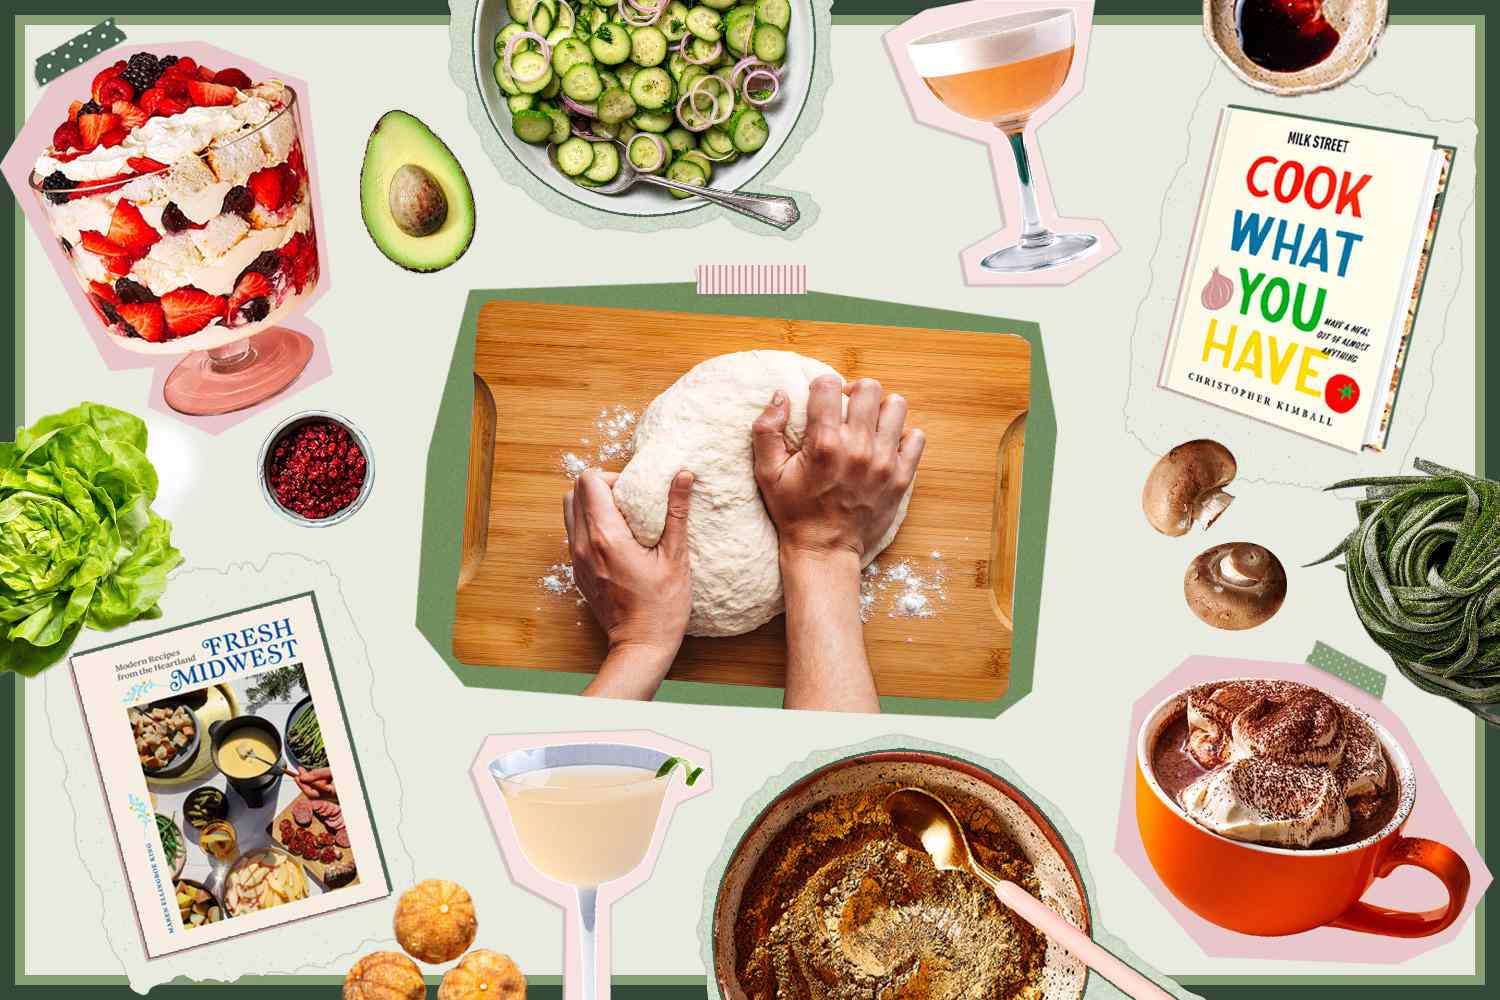 A collage of images that resembles a vision board, with cookbooks, cocktails, a trifle, cucumber salad, hot chocolate, and more